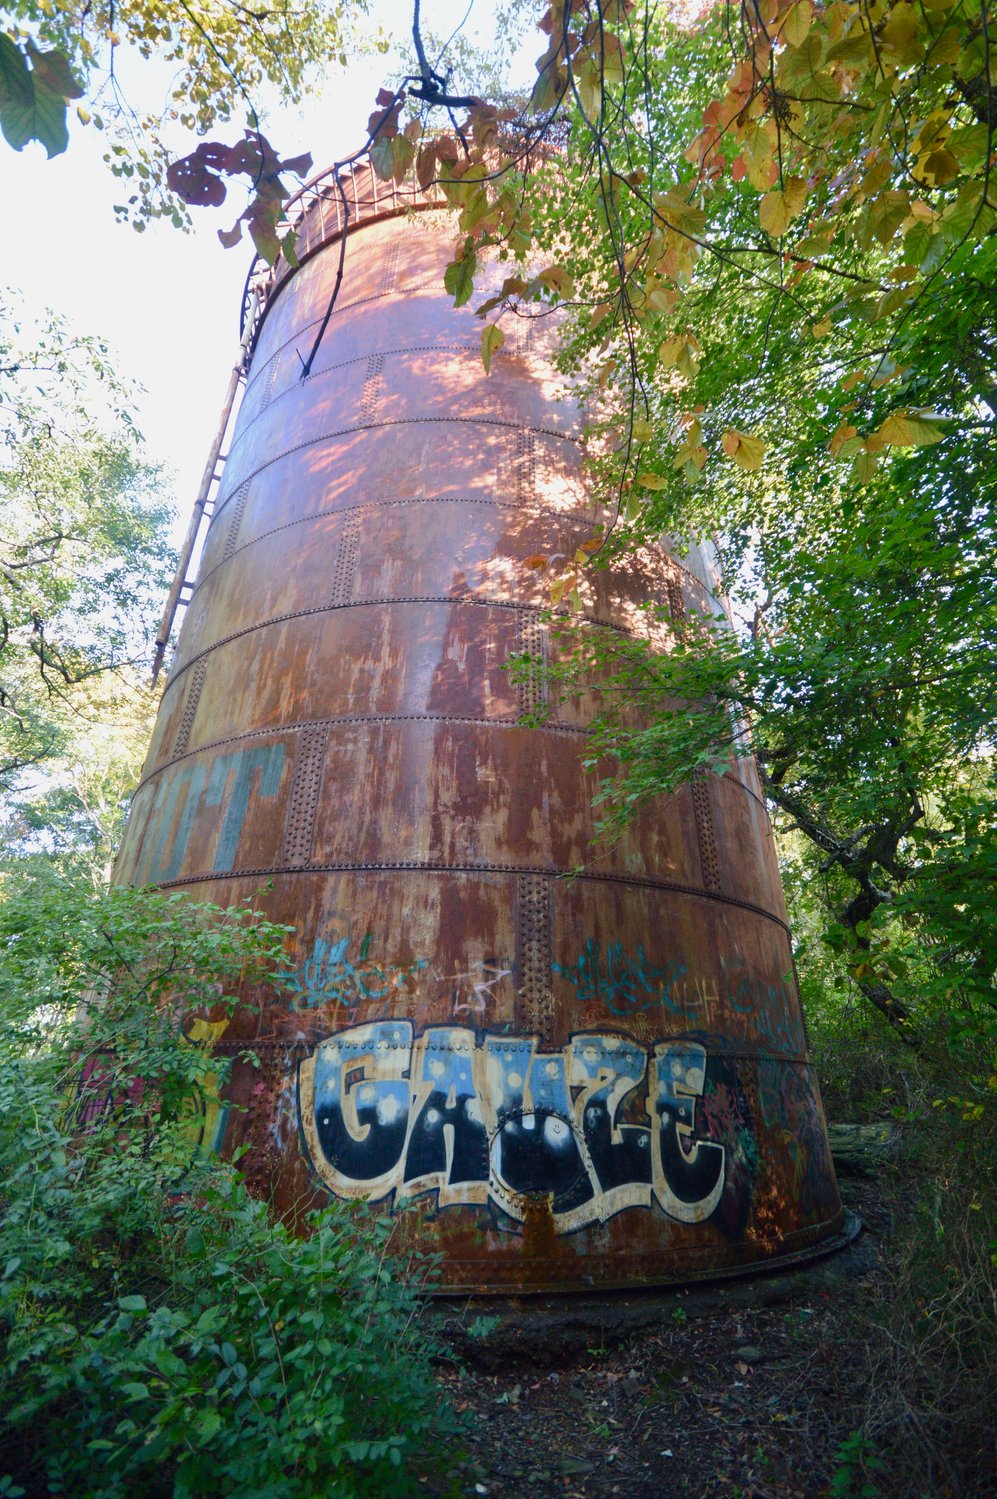 Luce has contacted the art department at Portsmouth High School to see if any students would be interested in painting a mural over the graffiti on the old water tower.